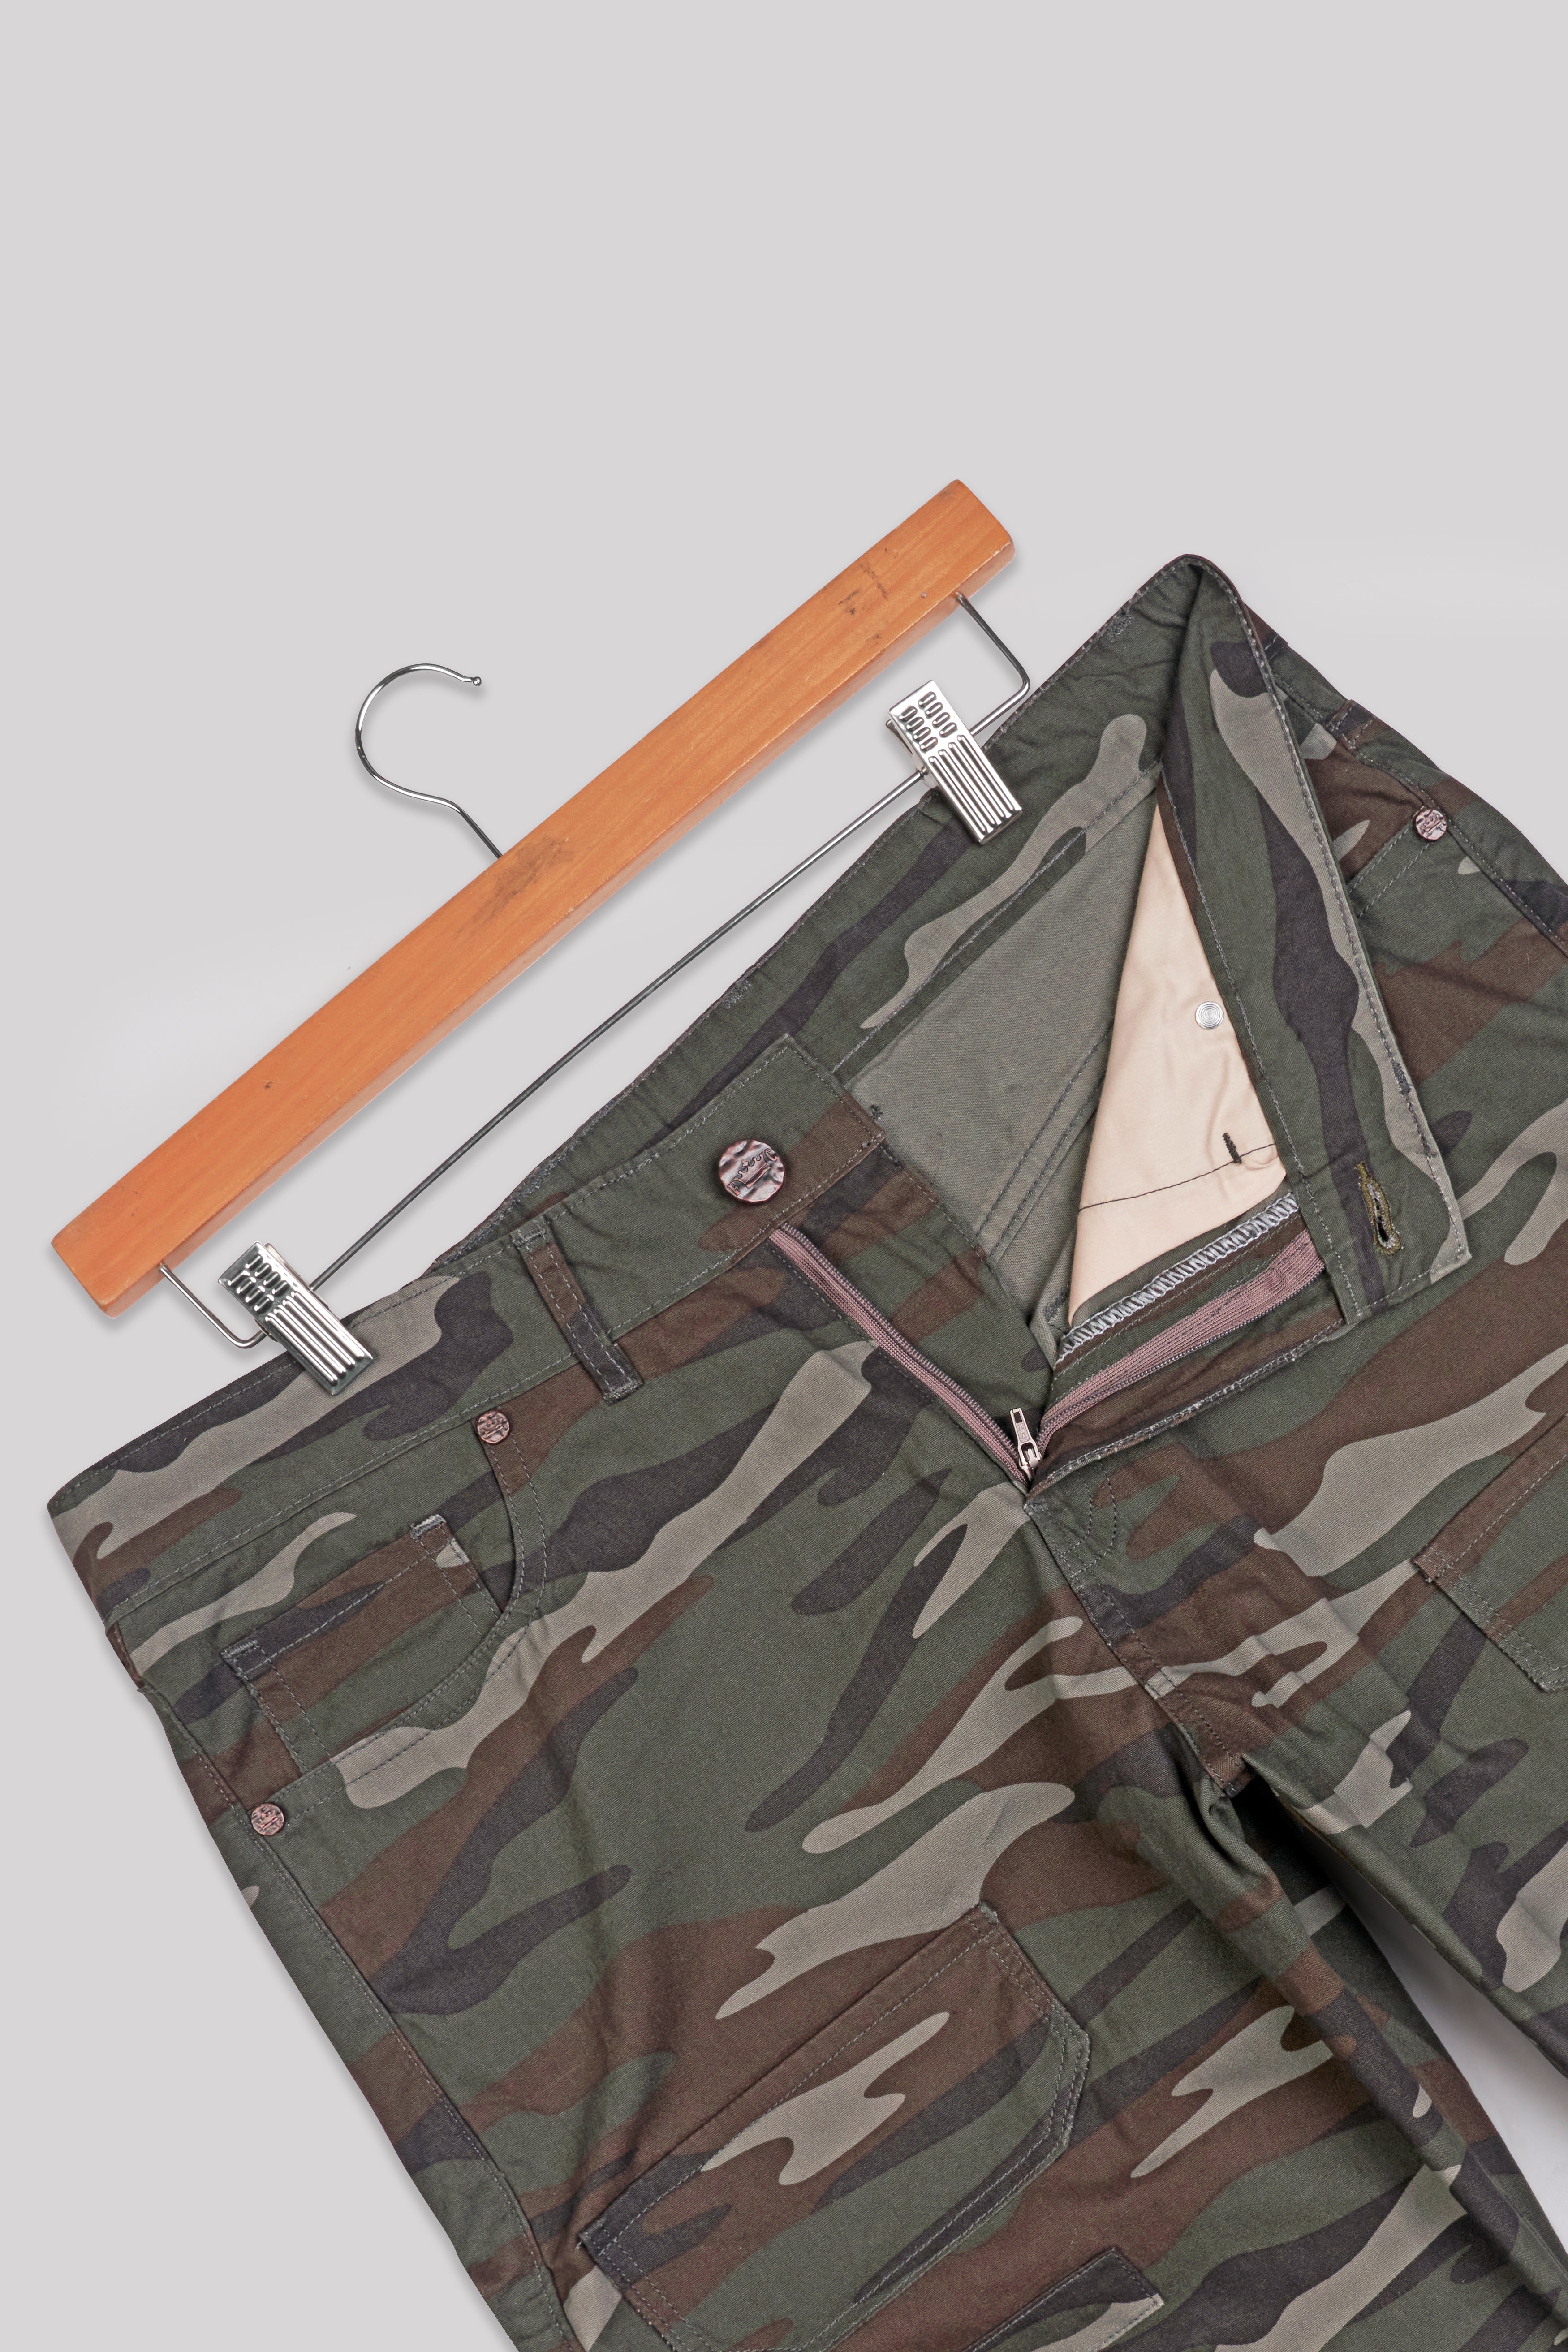 Tuscan Brown and Wenge Green Camouflage Cargo Shorts SR274-28, SR274-30, SR274-32, SR274-34, SR274-36, SR274-38, SR274-40, SR274-42, SR274-44